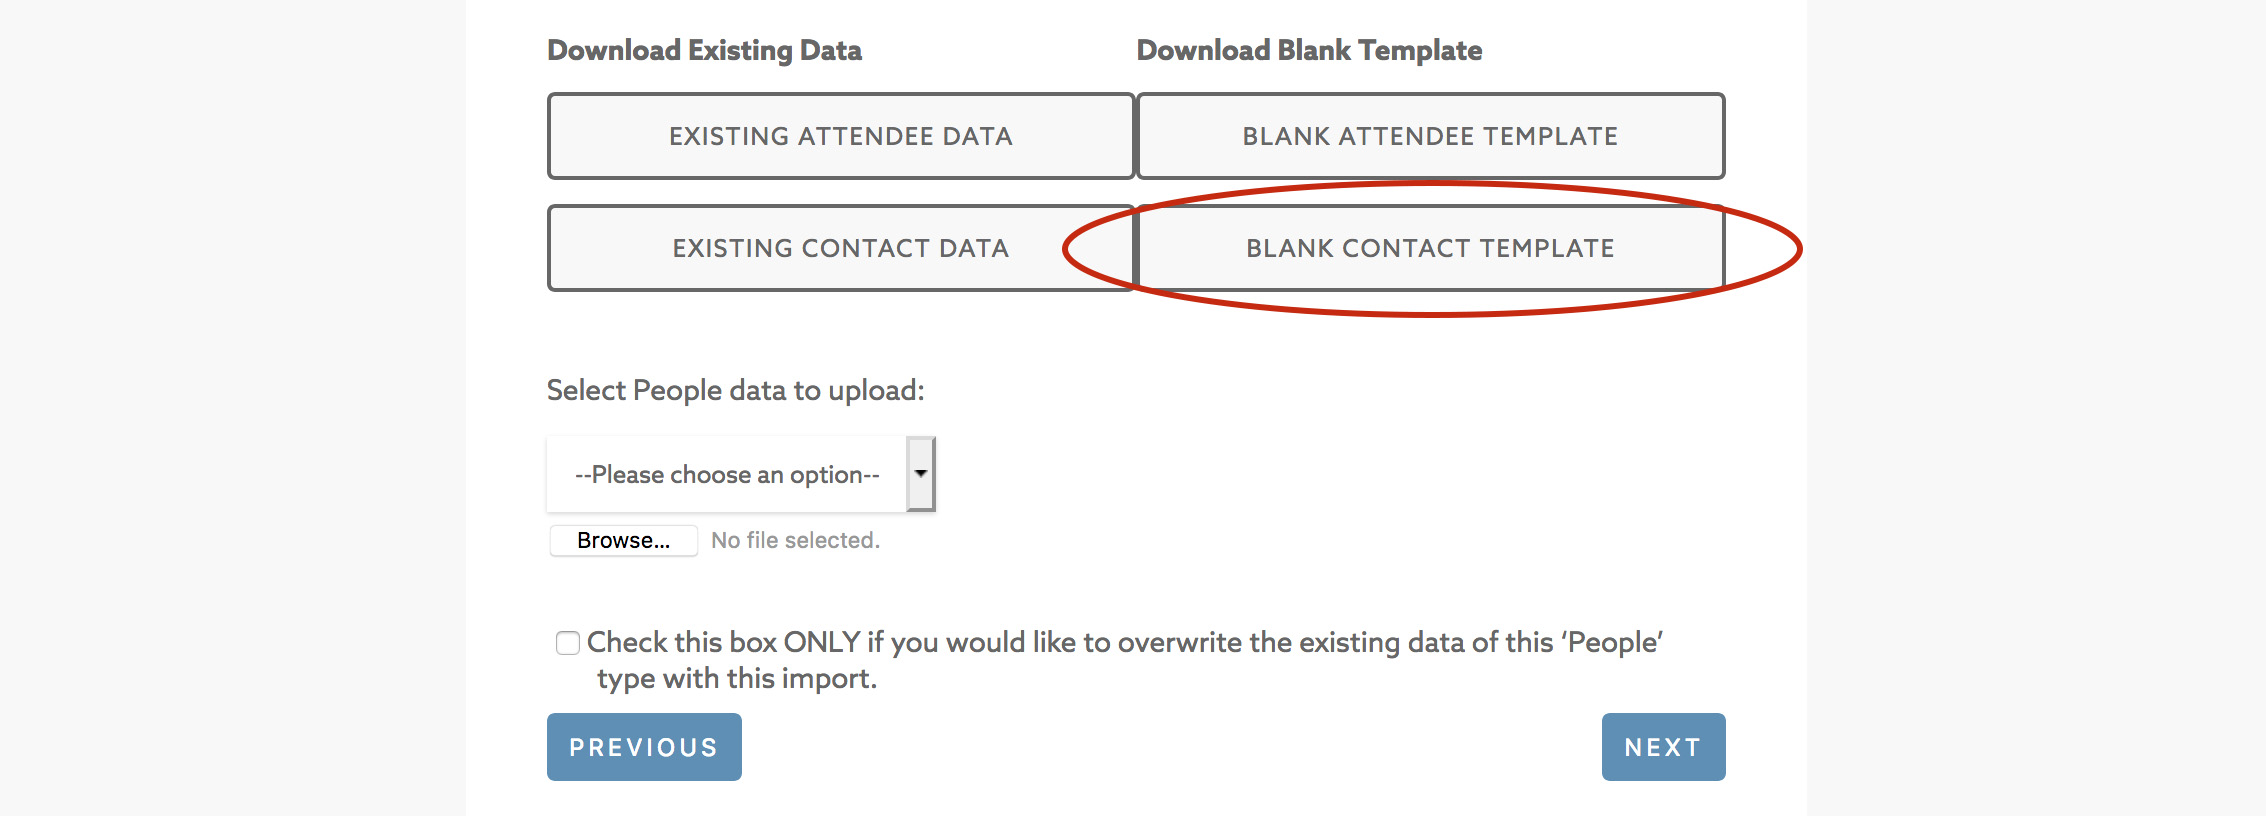 Select Blank Contact template